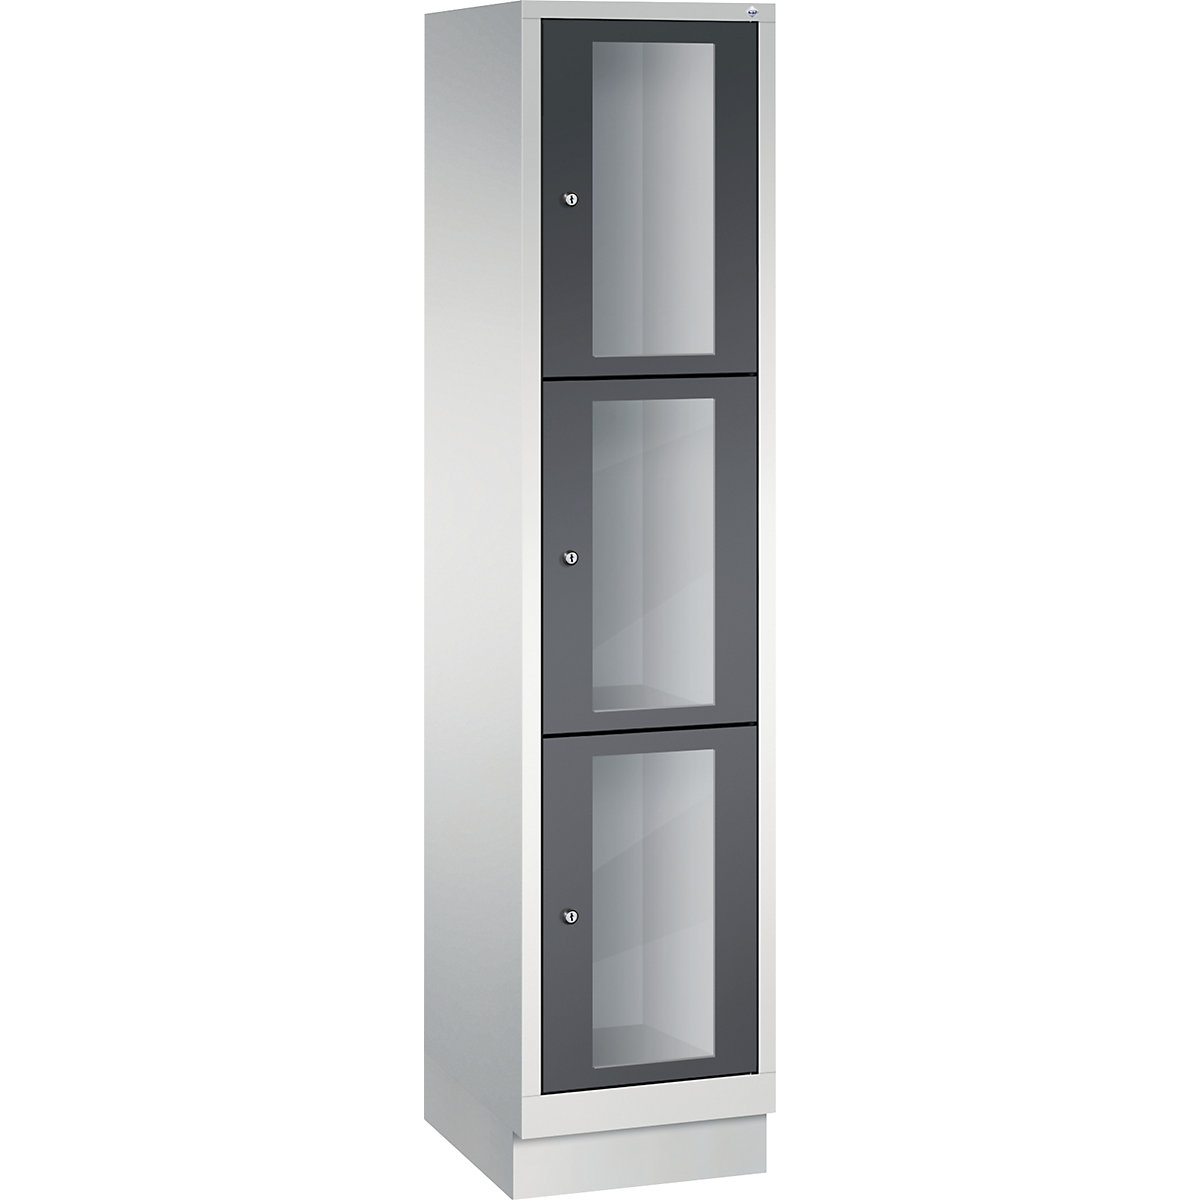 C+P – CLASSIC locker unit, compartment height 510 mm, with plinth, 3 compartments, width 420 mm, black grey door